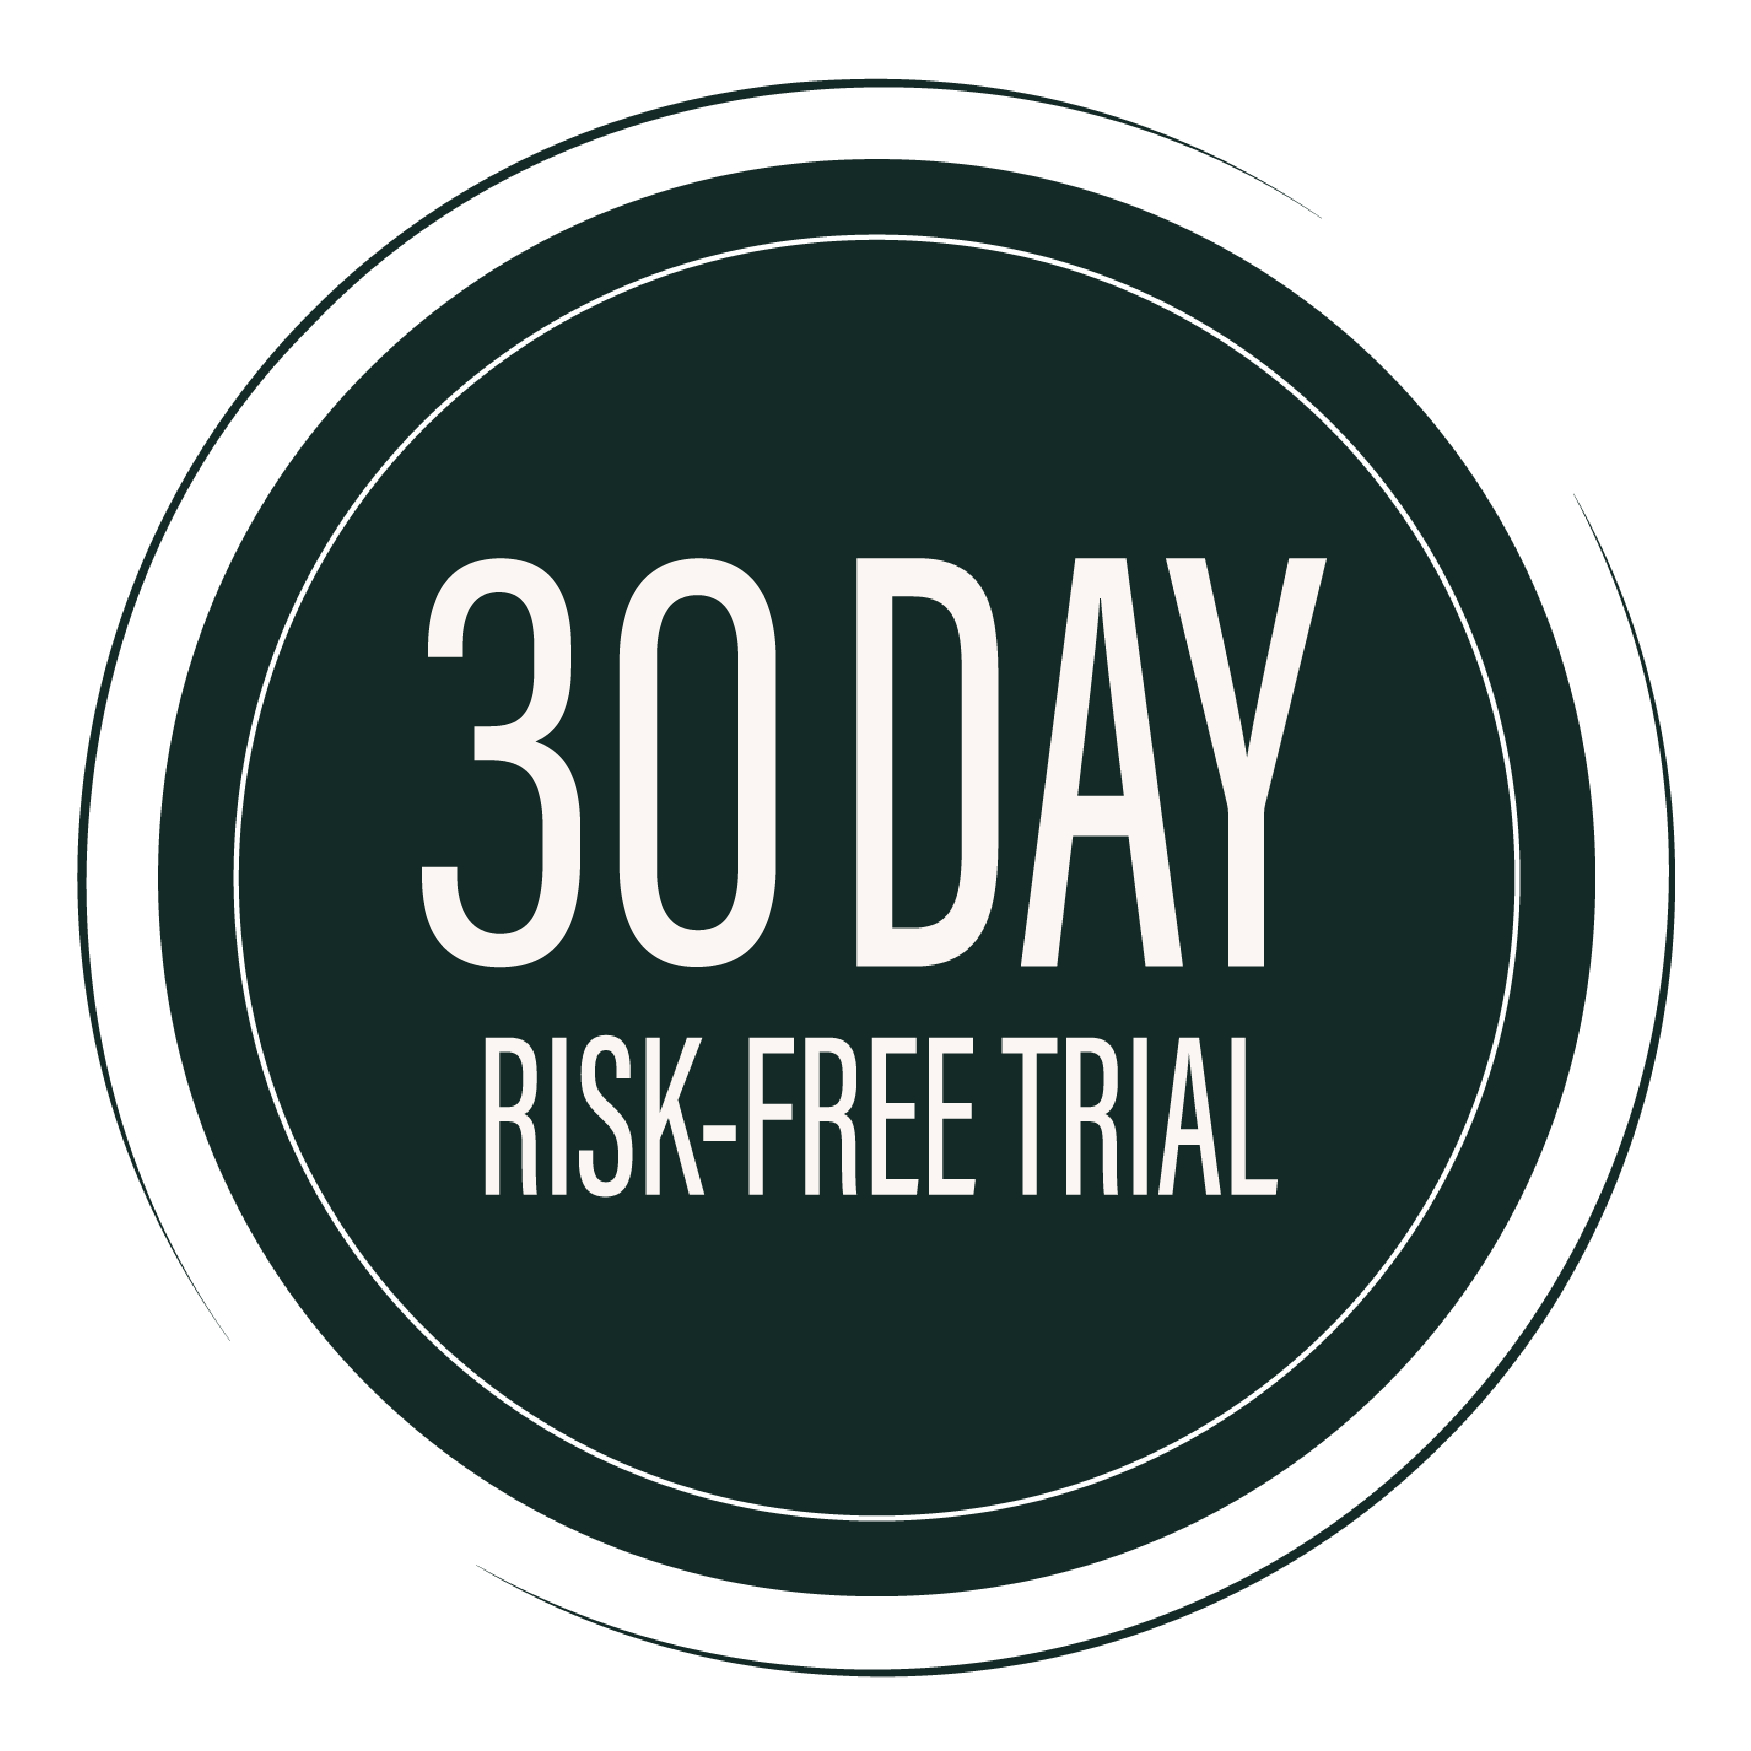 Have a risk-free trial